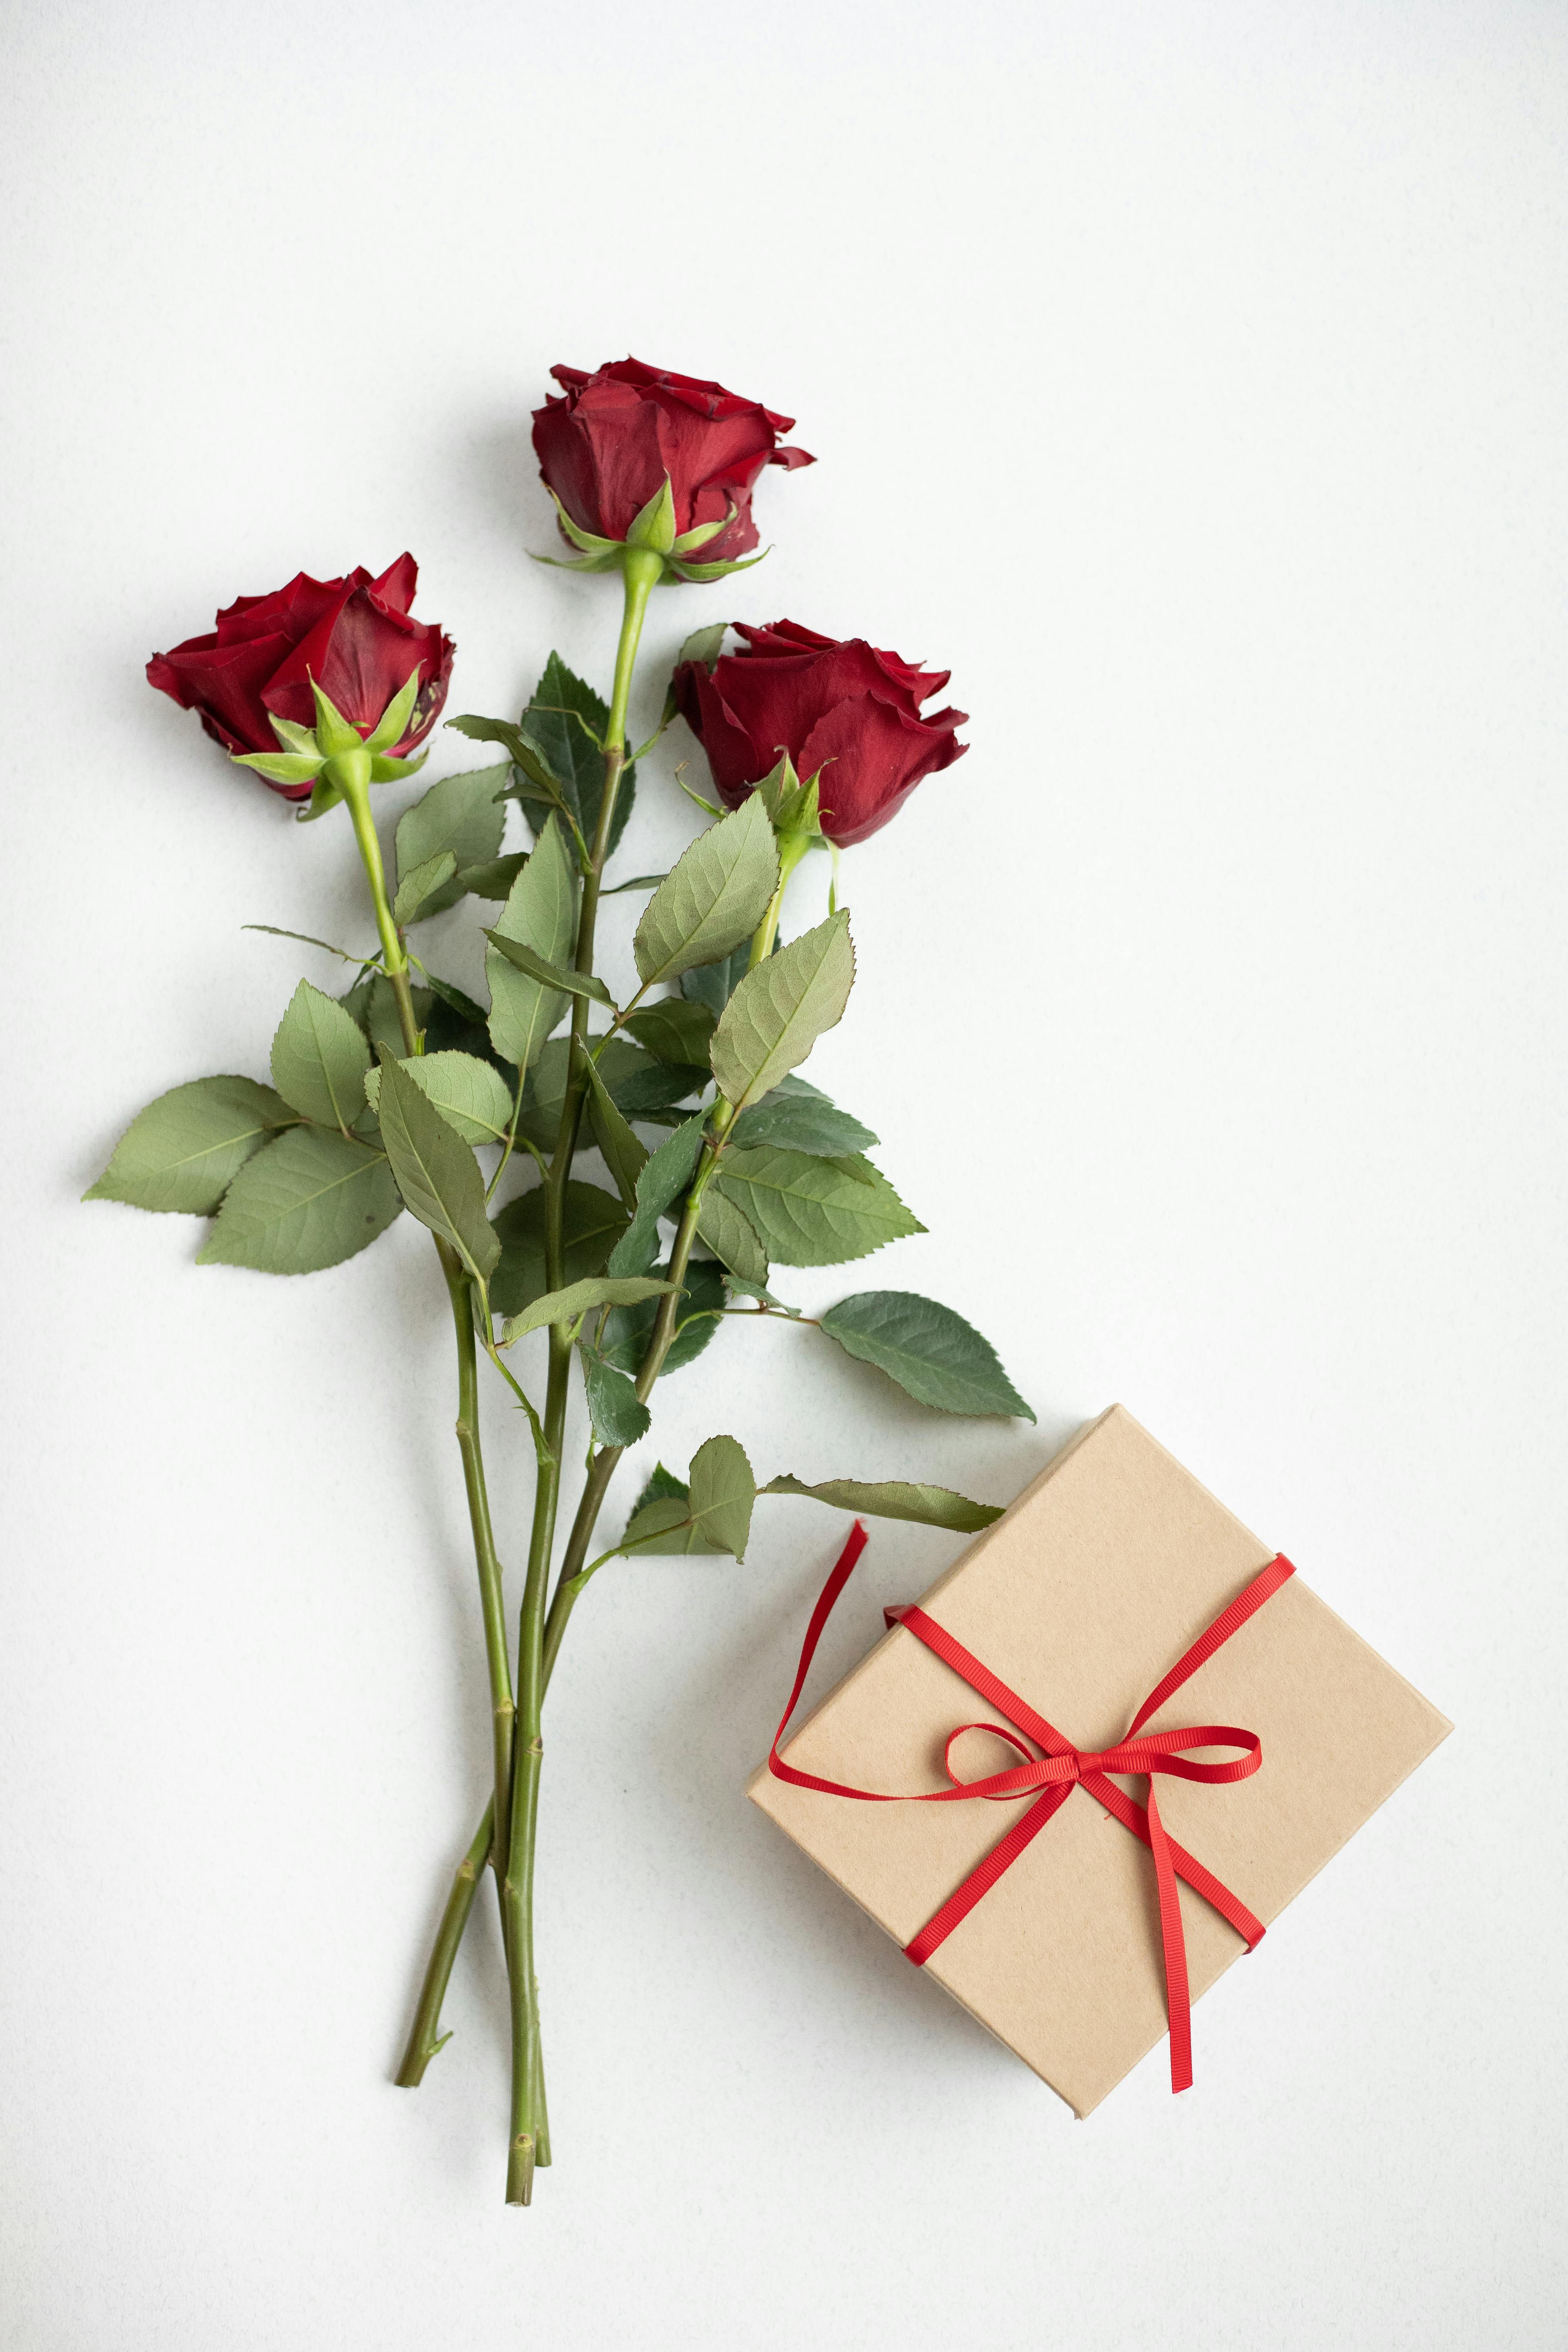 A gift box and some roses | Source: Pexels